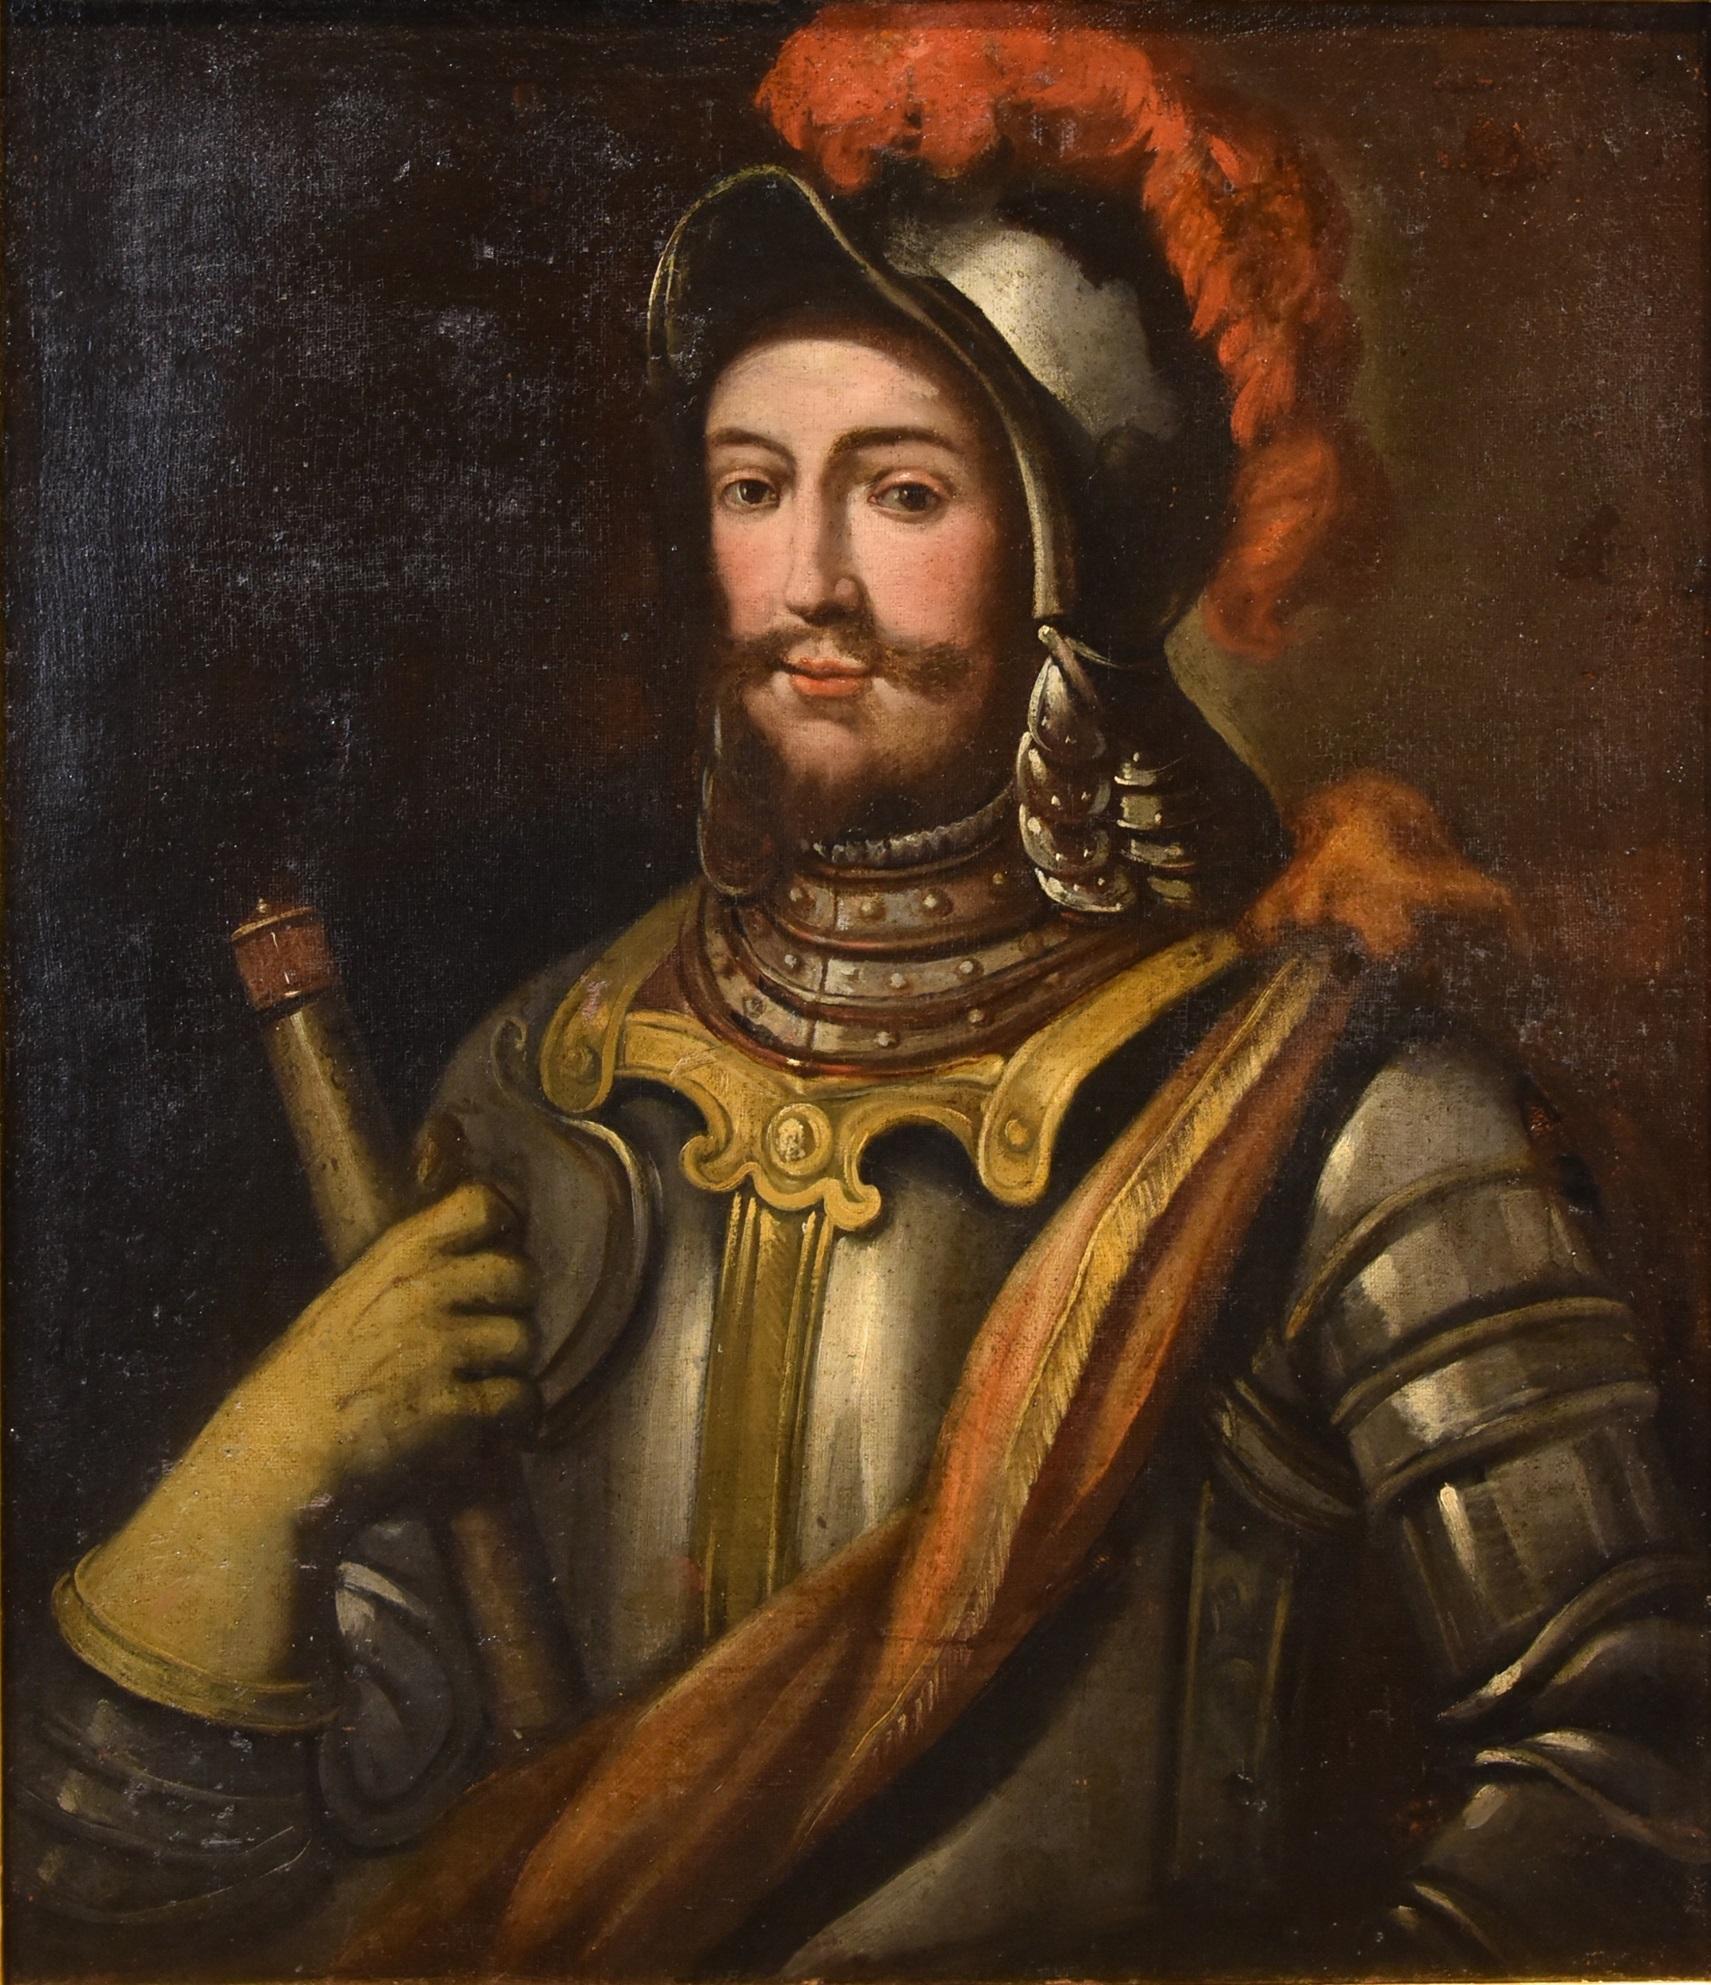 Portrait Knight Paint Oil on canvas 17th Century Lombard school Old master Italy - Old Masters Painting by Lombard painter of the 17th century